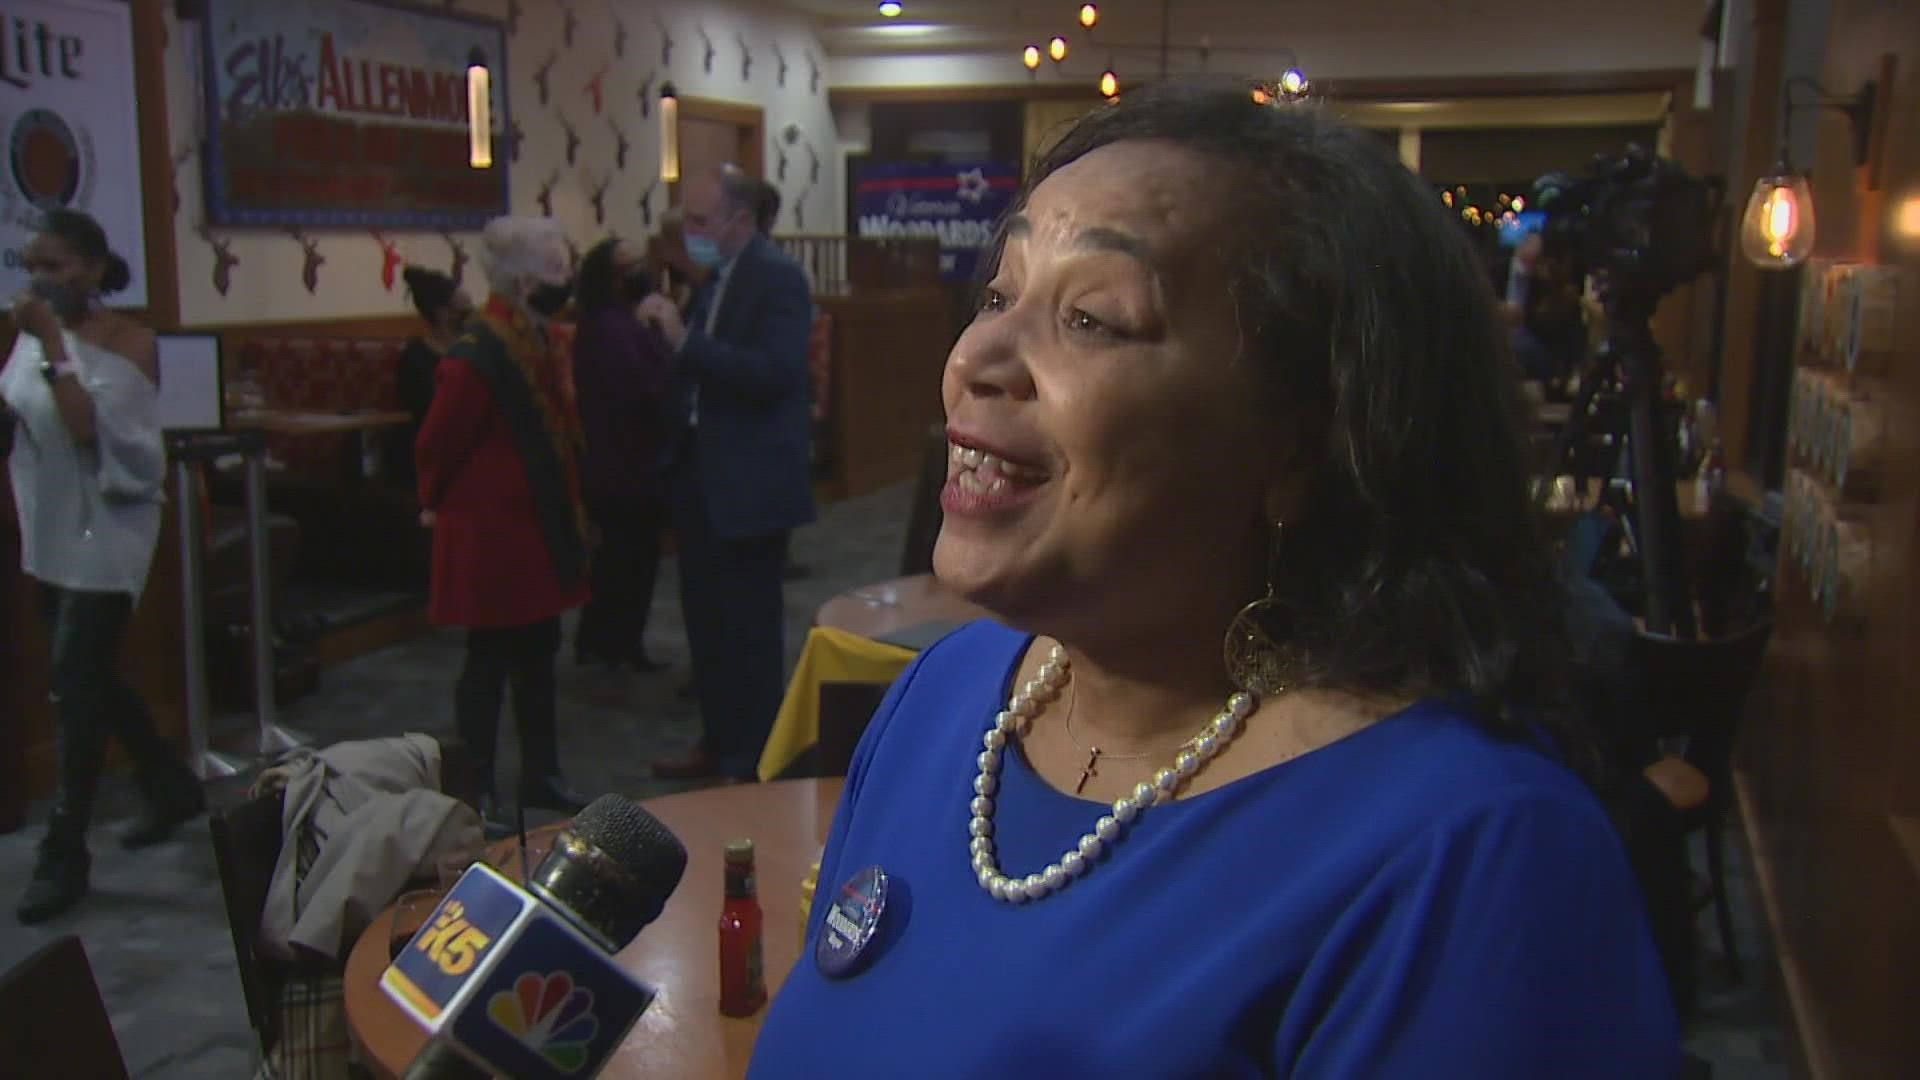 Victoria Woodards received 58% of the vote following an initial count Tuesday night.